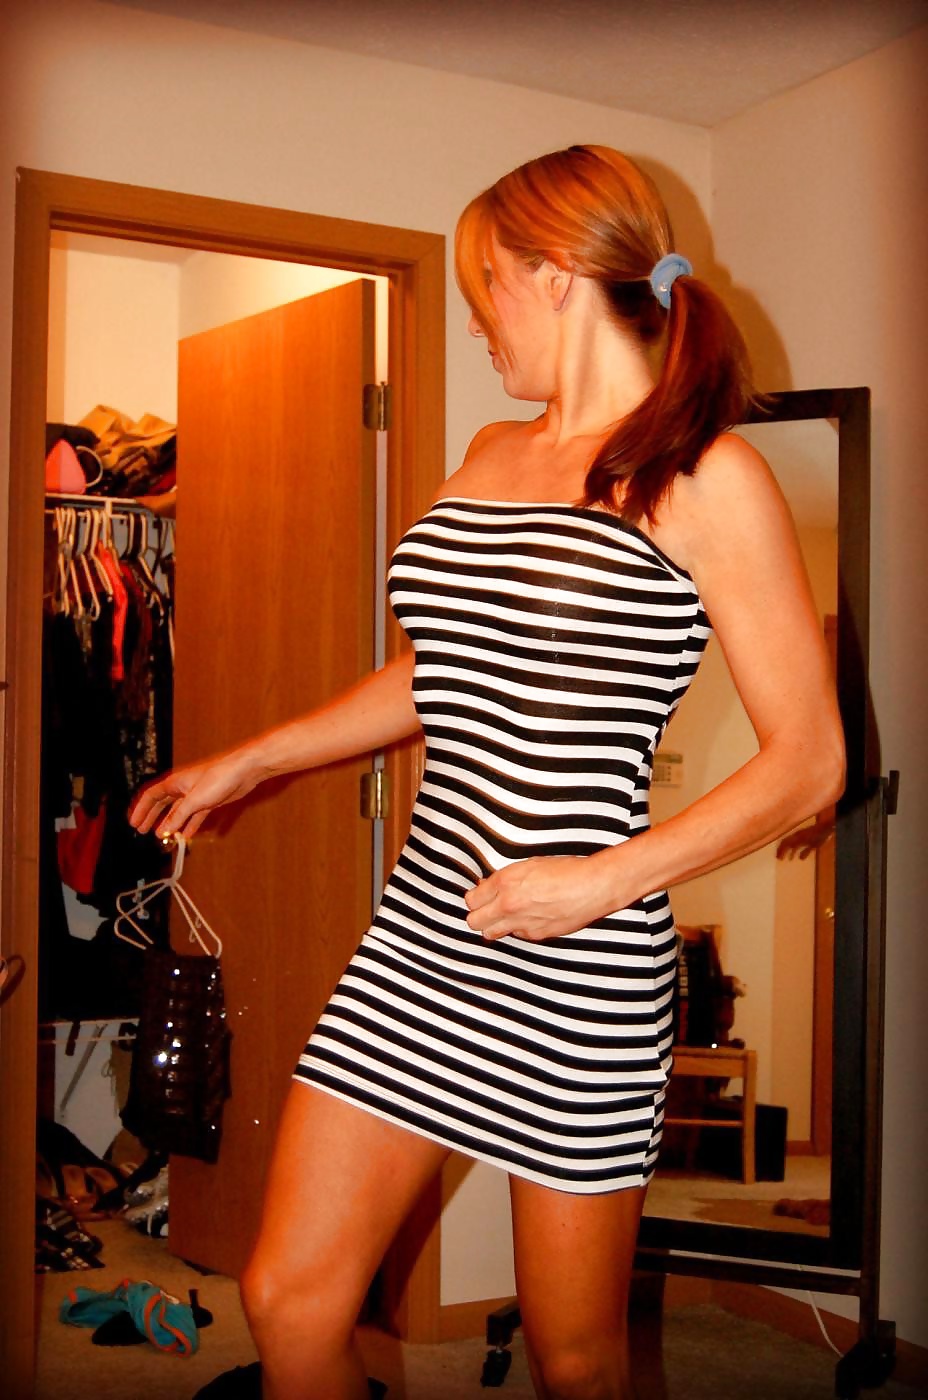 Sex Gallery Wife likes dressing up